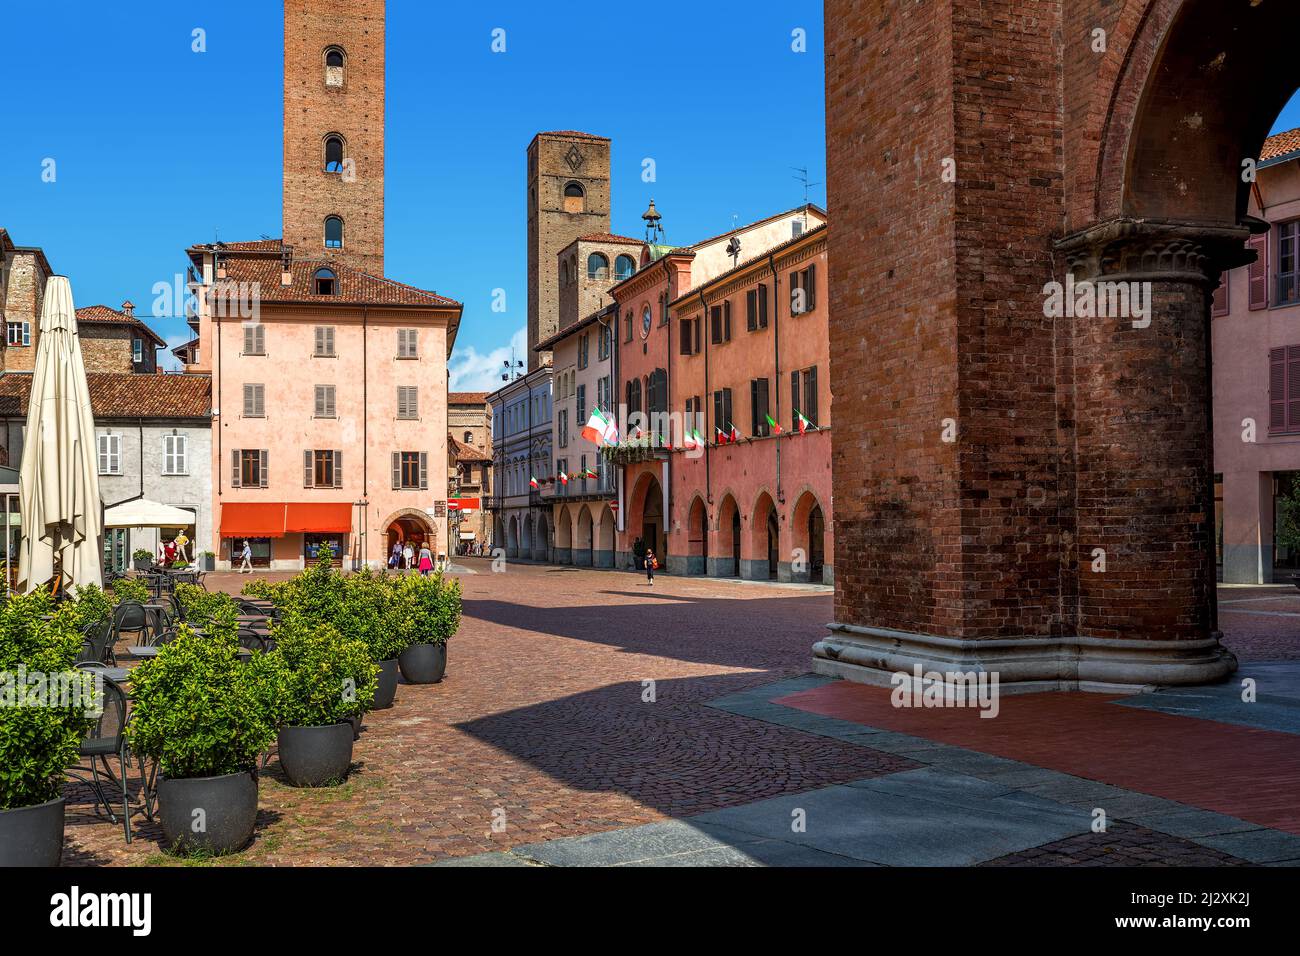 Cobblestone square surrounded by historic houses and medieval towers in old town of Alba, Piedmont, Northern Italy. Stock Photo